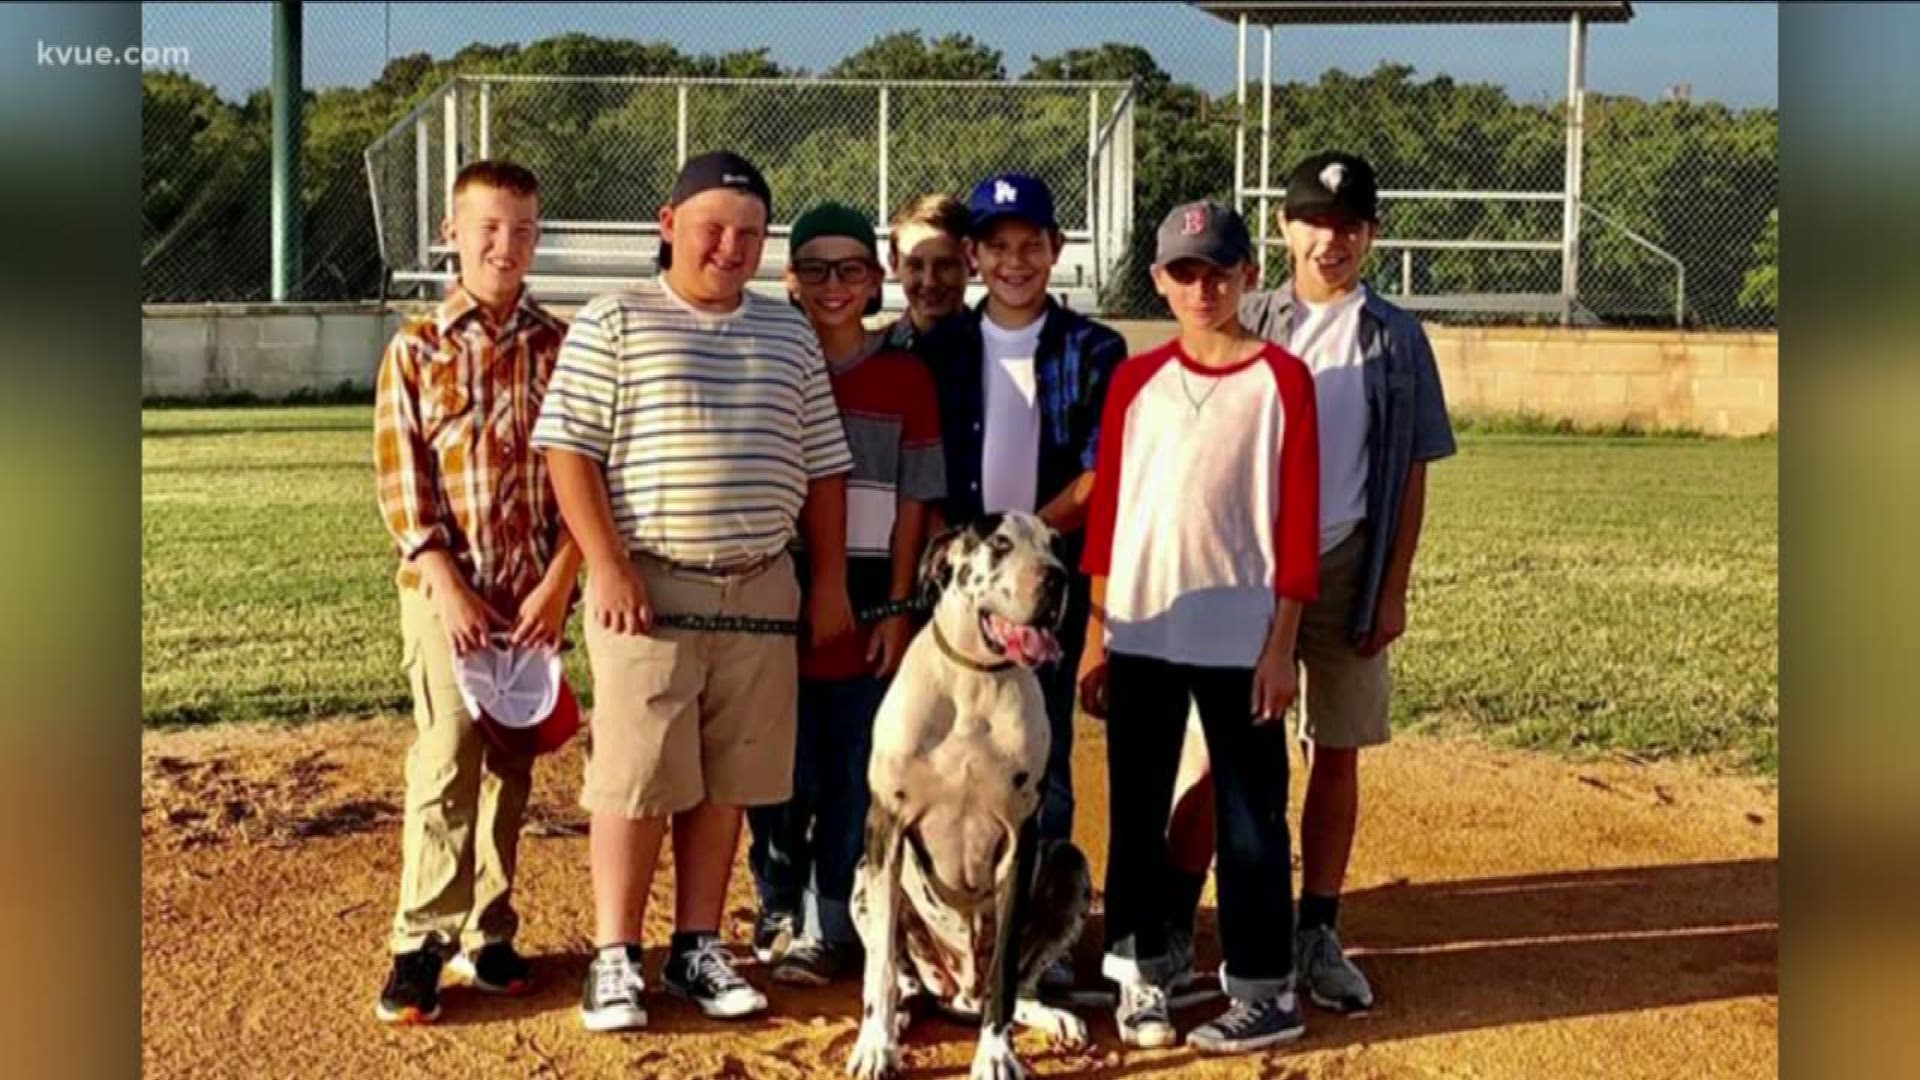 Members of the original cast of 'The Sandlot' will be in Dripping Springs on Sunday, Oct. 20, for a special screening.